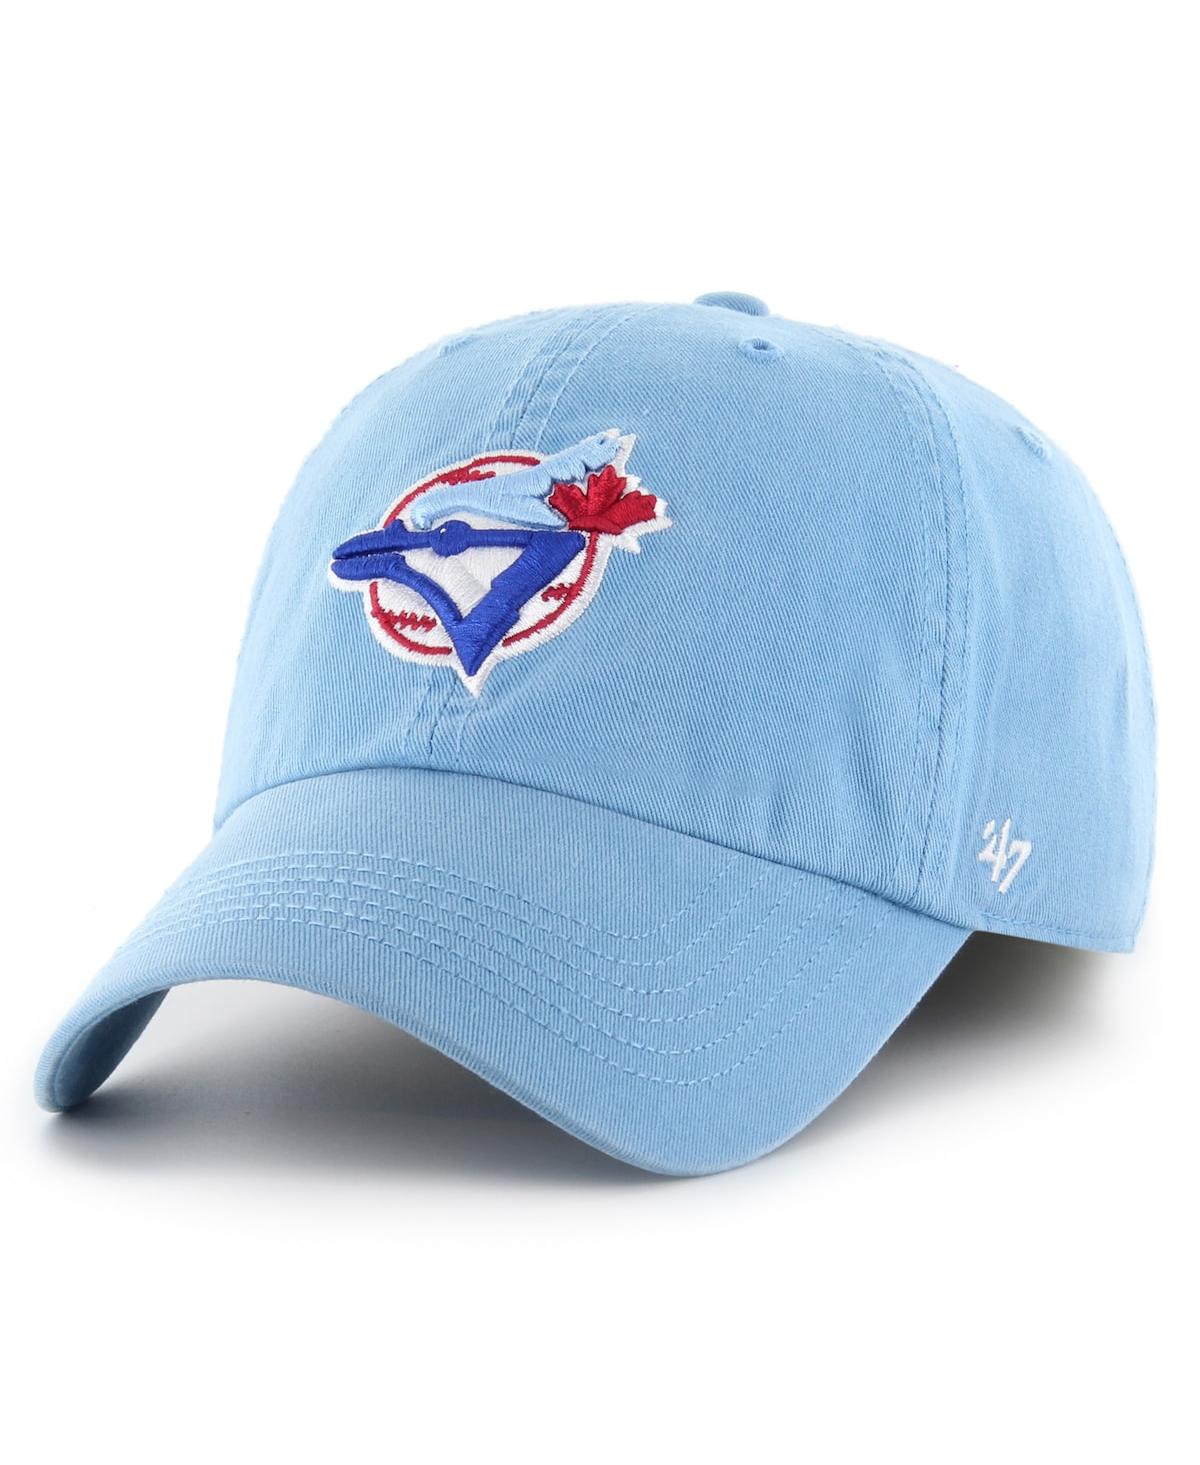 47 Brand Men's ' Light Blue Toronto Blue Jays Cooperstown Collection Franchise Fitted Hat